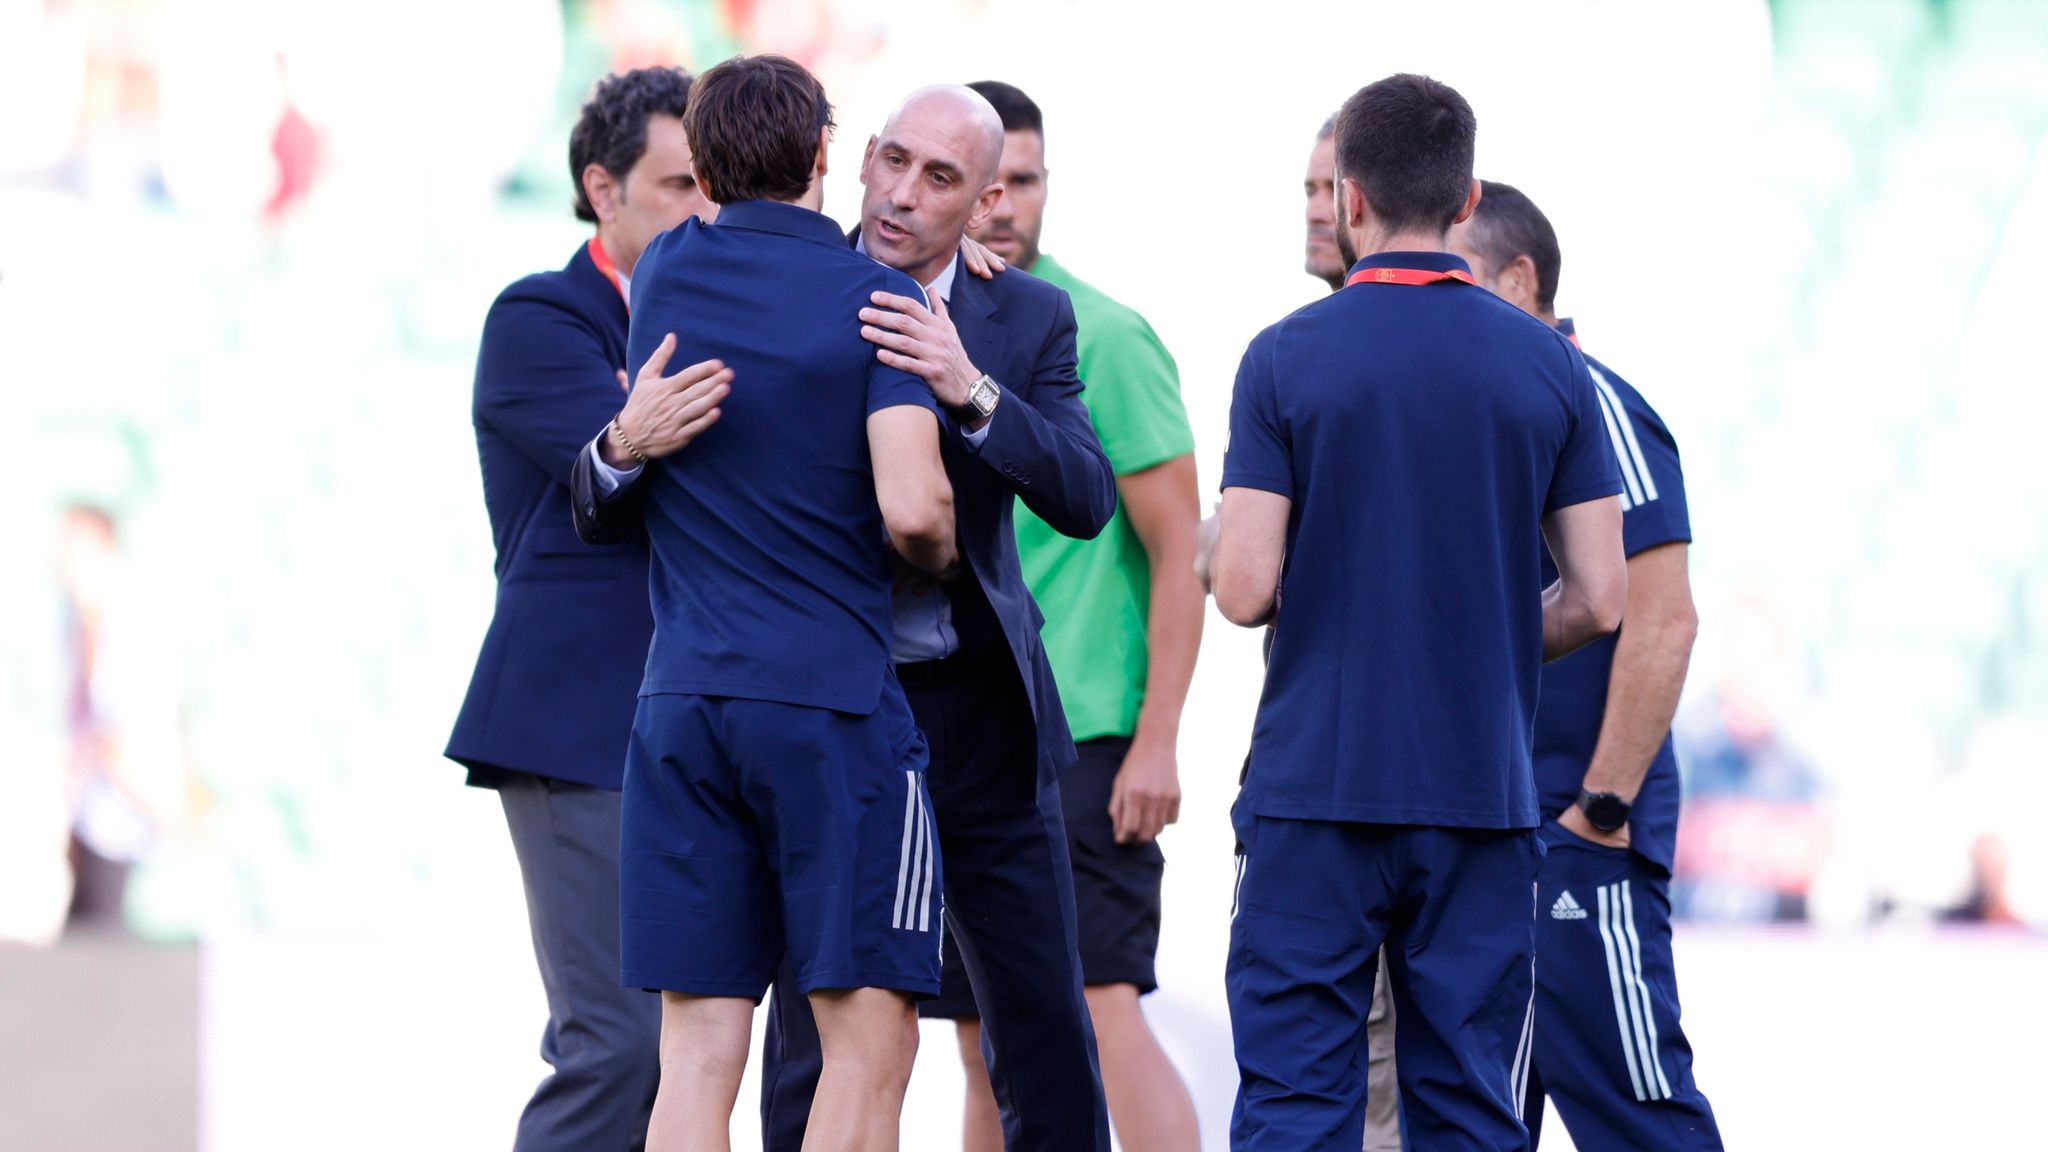 Spanish men's team express solidarity with women after Luis Rubiales kiss | World News | Sky News